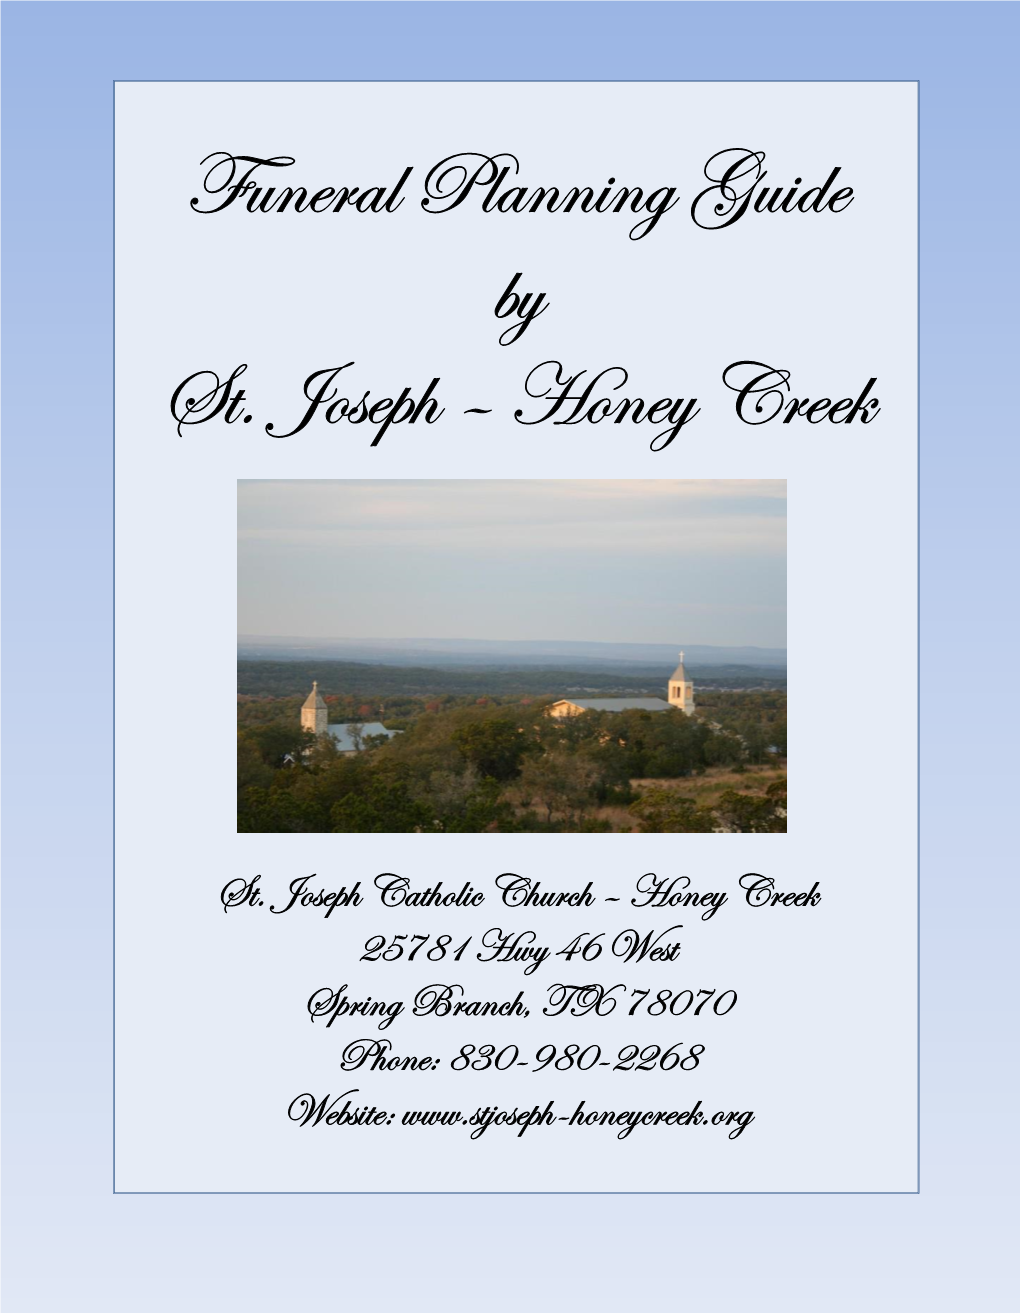 Funeral Planning Guide by St. Joseph – Honey Creek